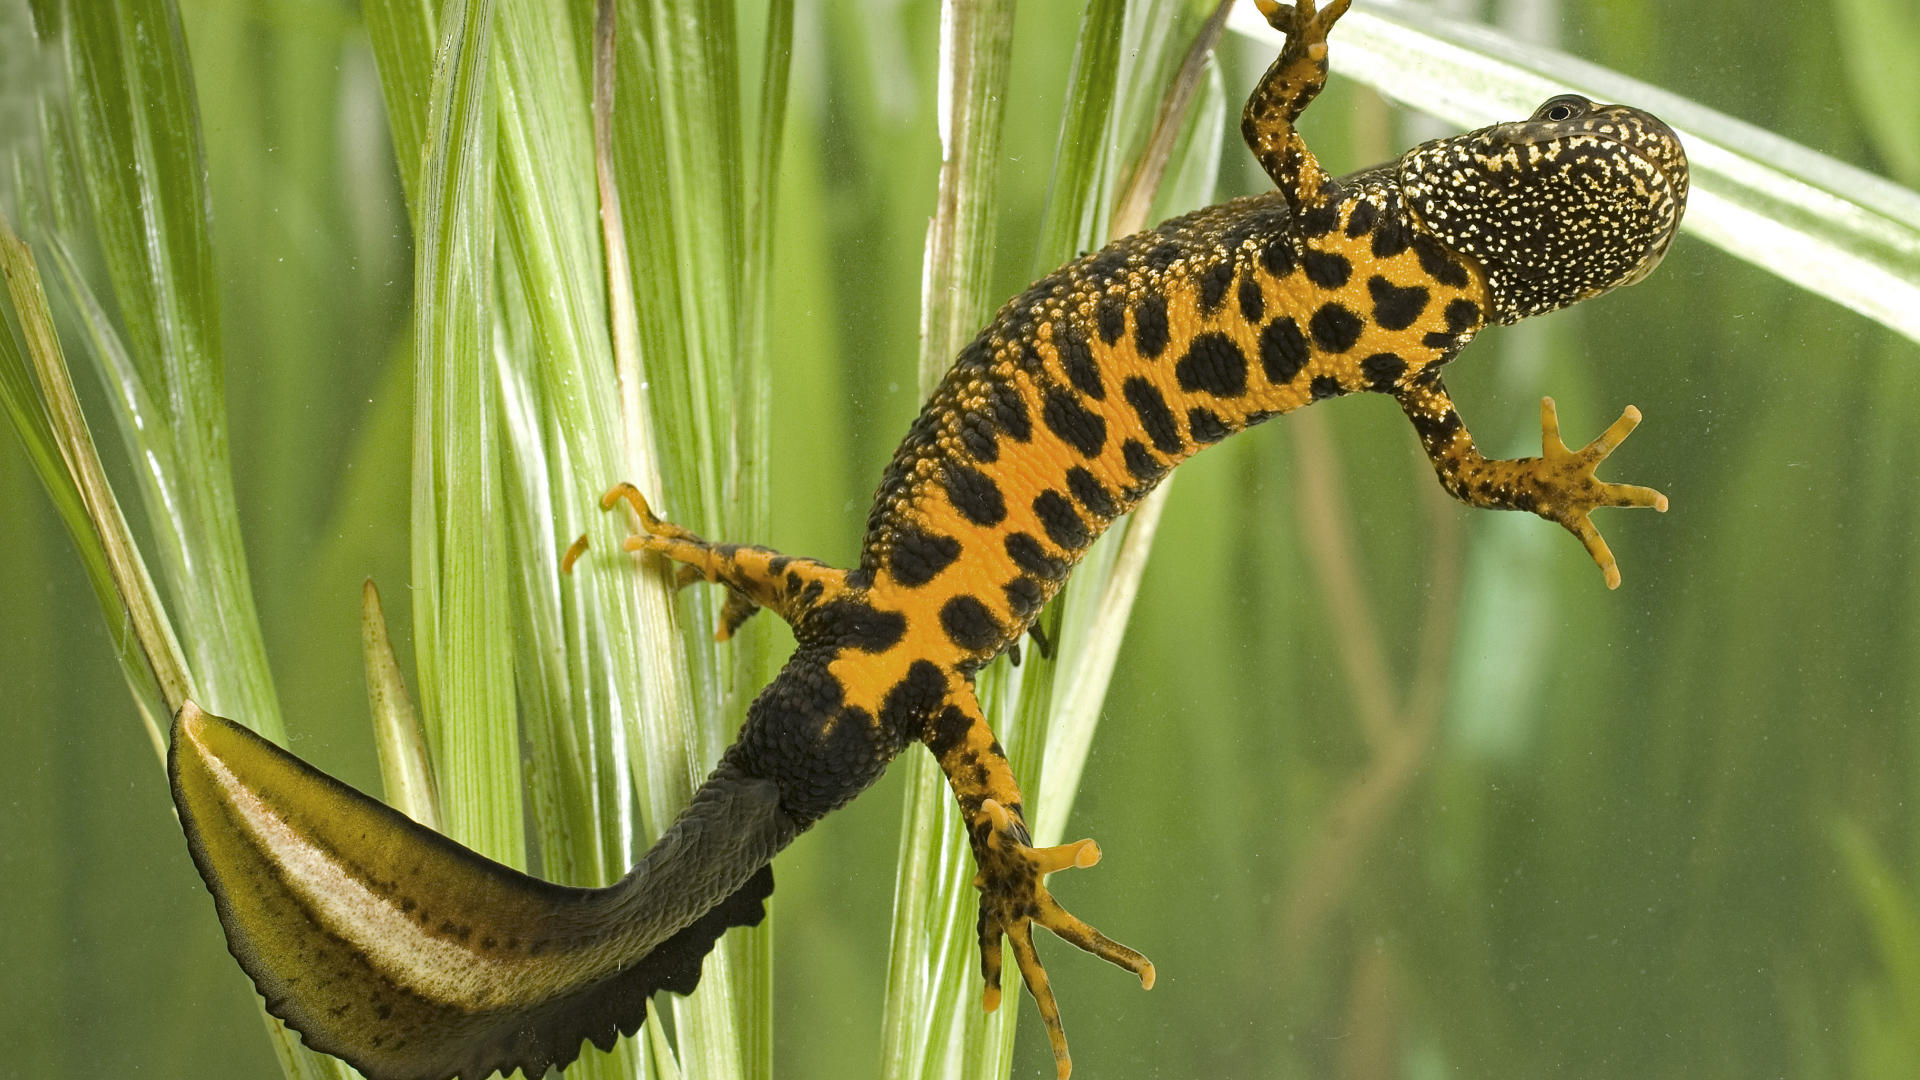 Great Crested Newt, West Sussex, England